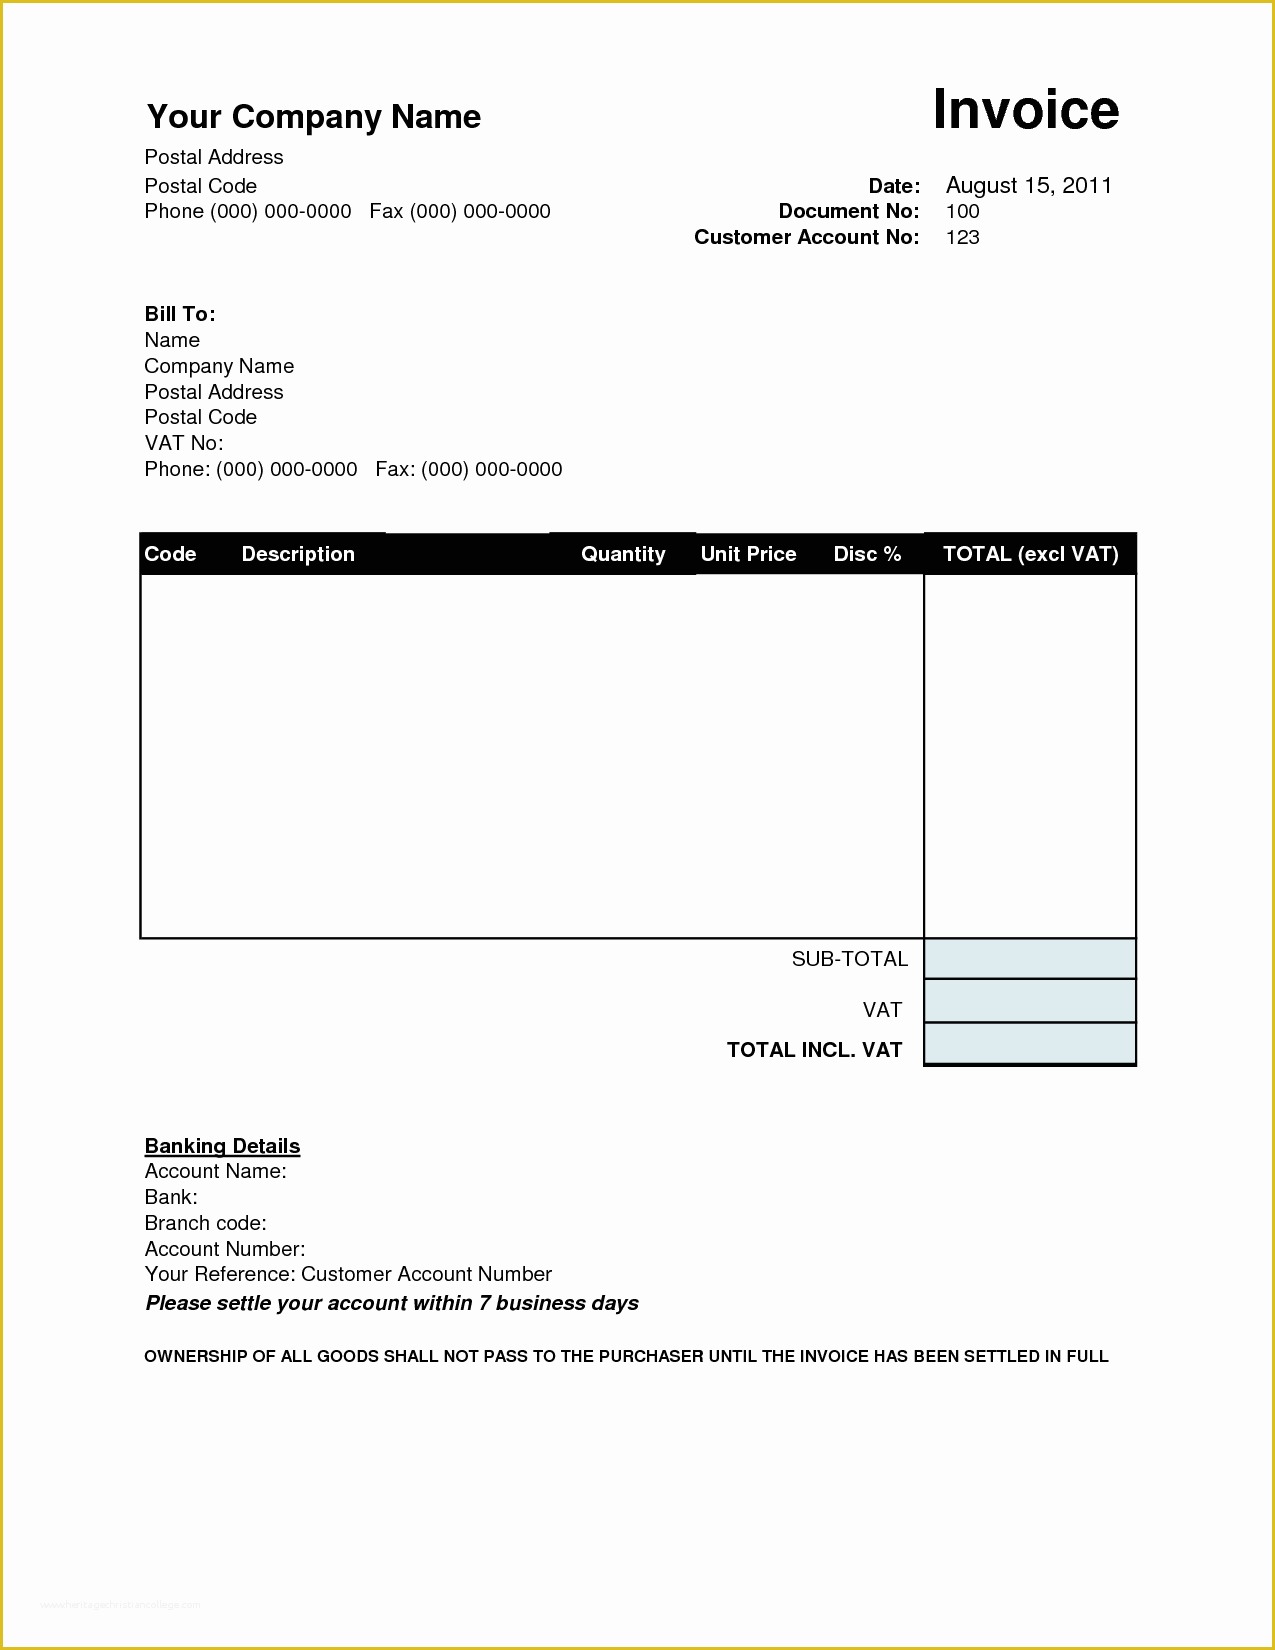 Free Online Invoice Template Of Invoice Bank Details